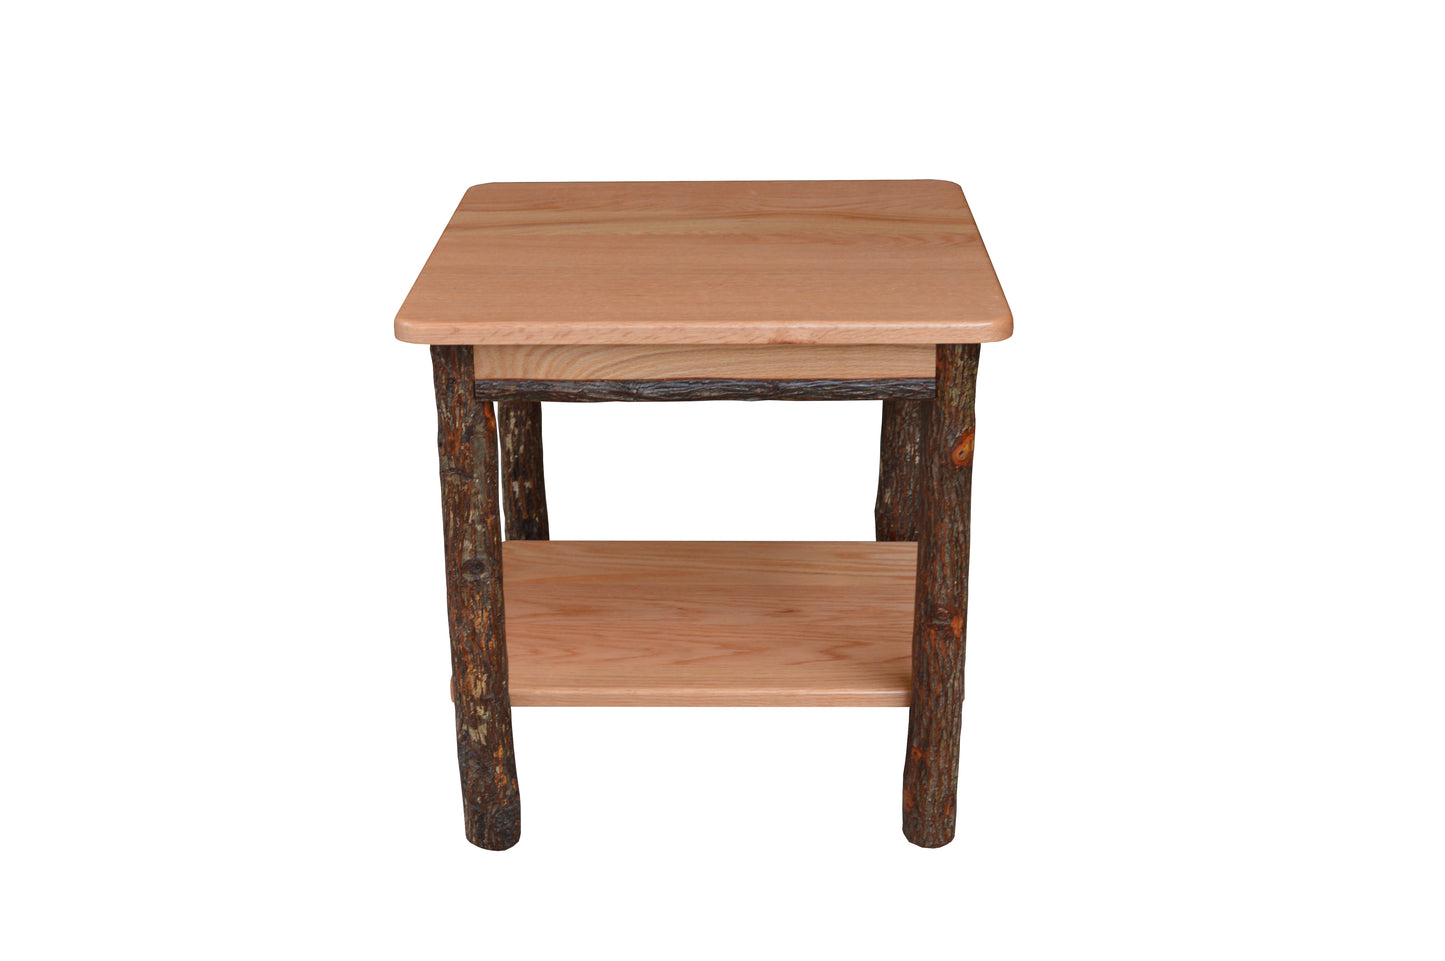 A&L Furniture Co. Hickory Solid Wood End Table with Shelf - LEAD TIME TO SHIP 10 BUSINESS DAYS